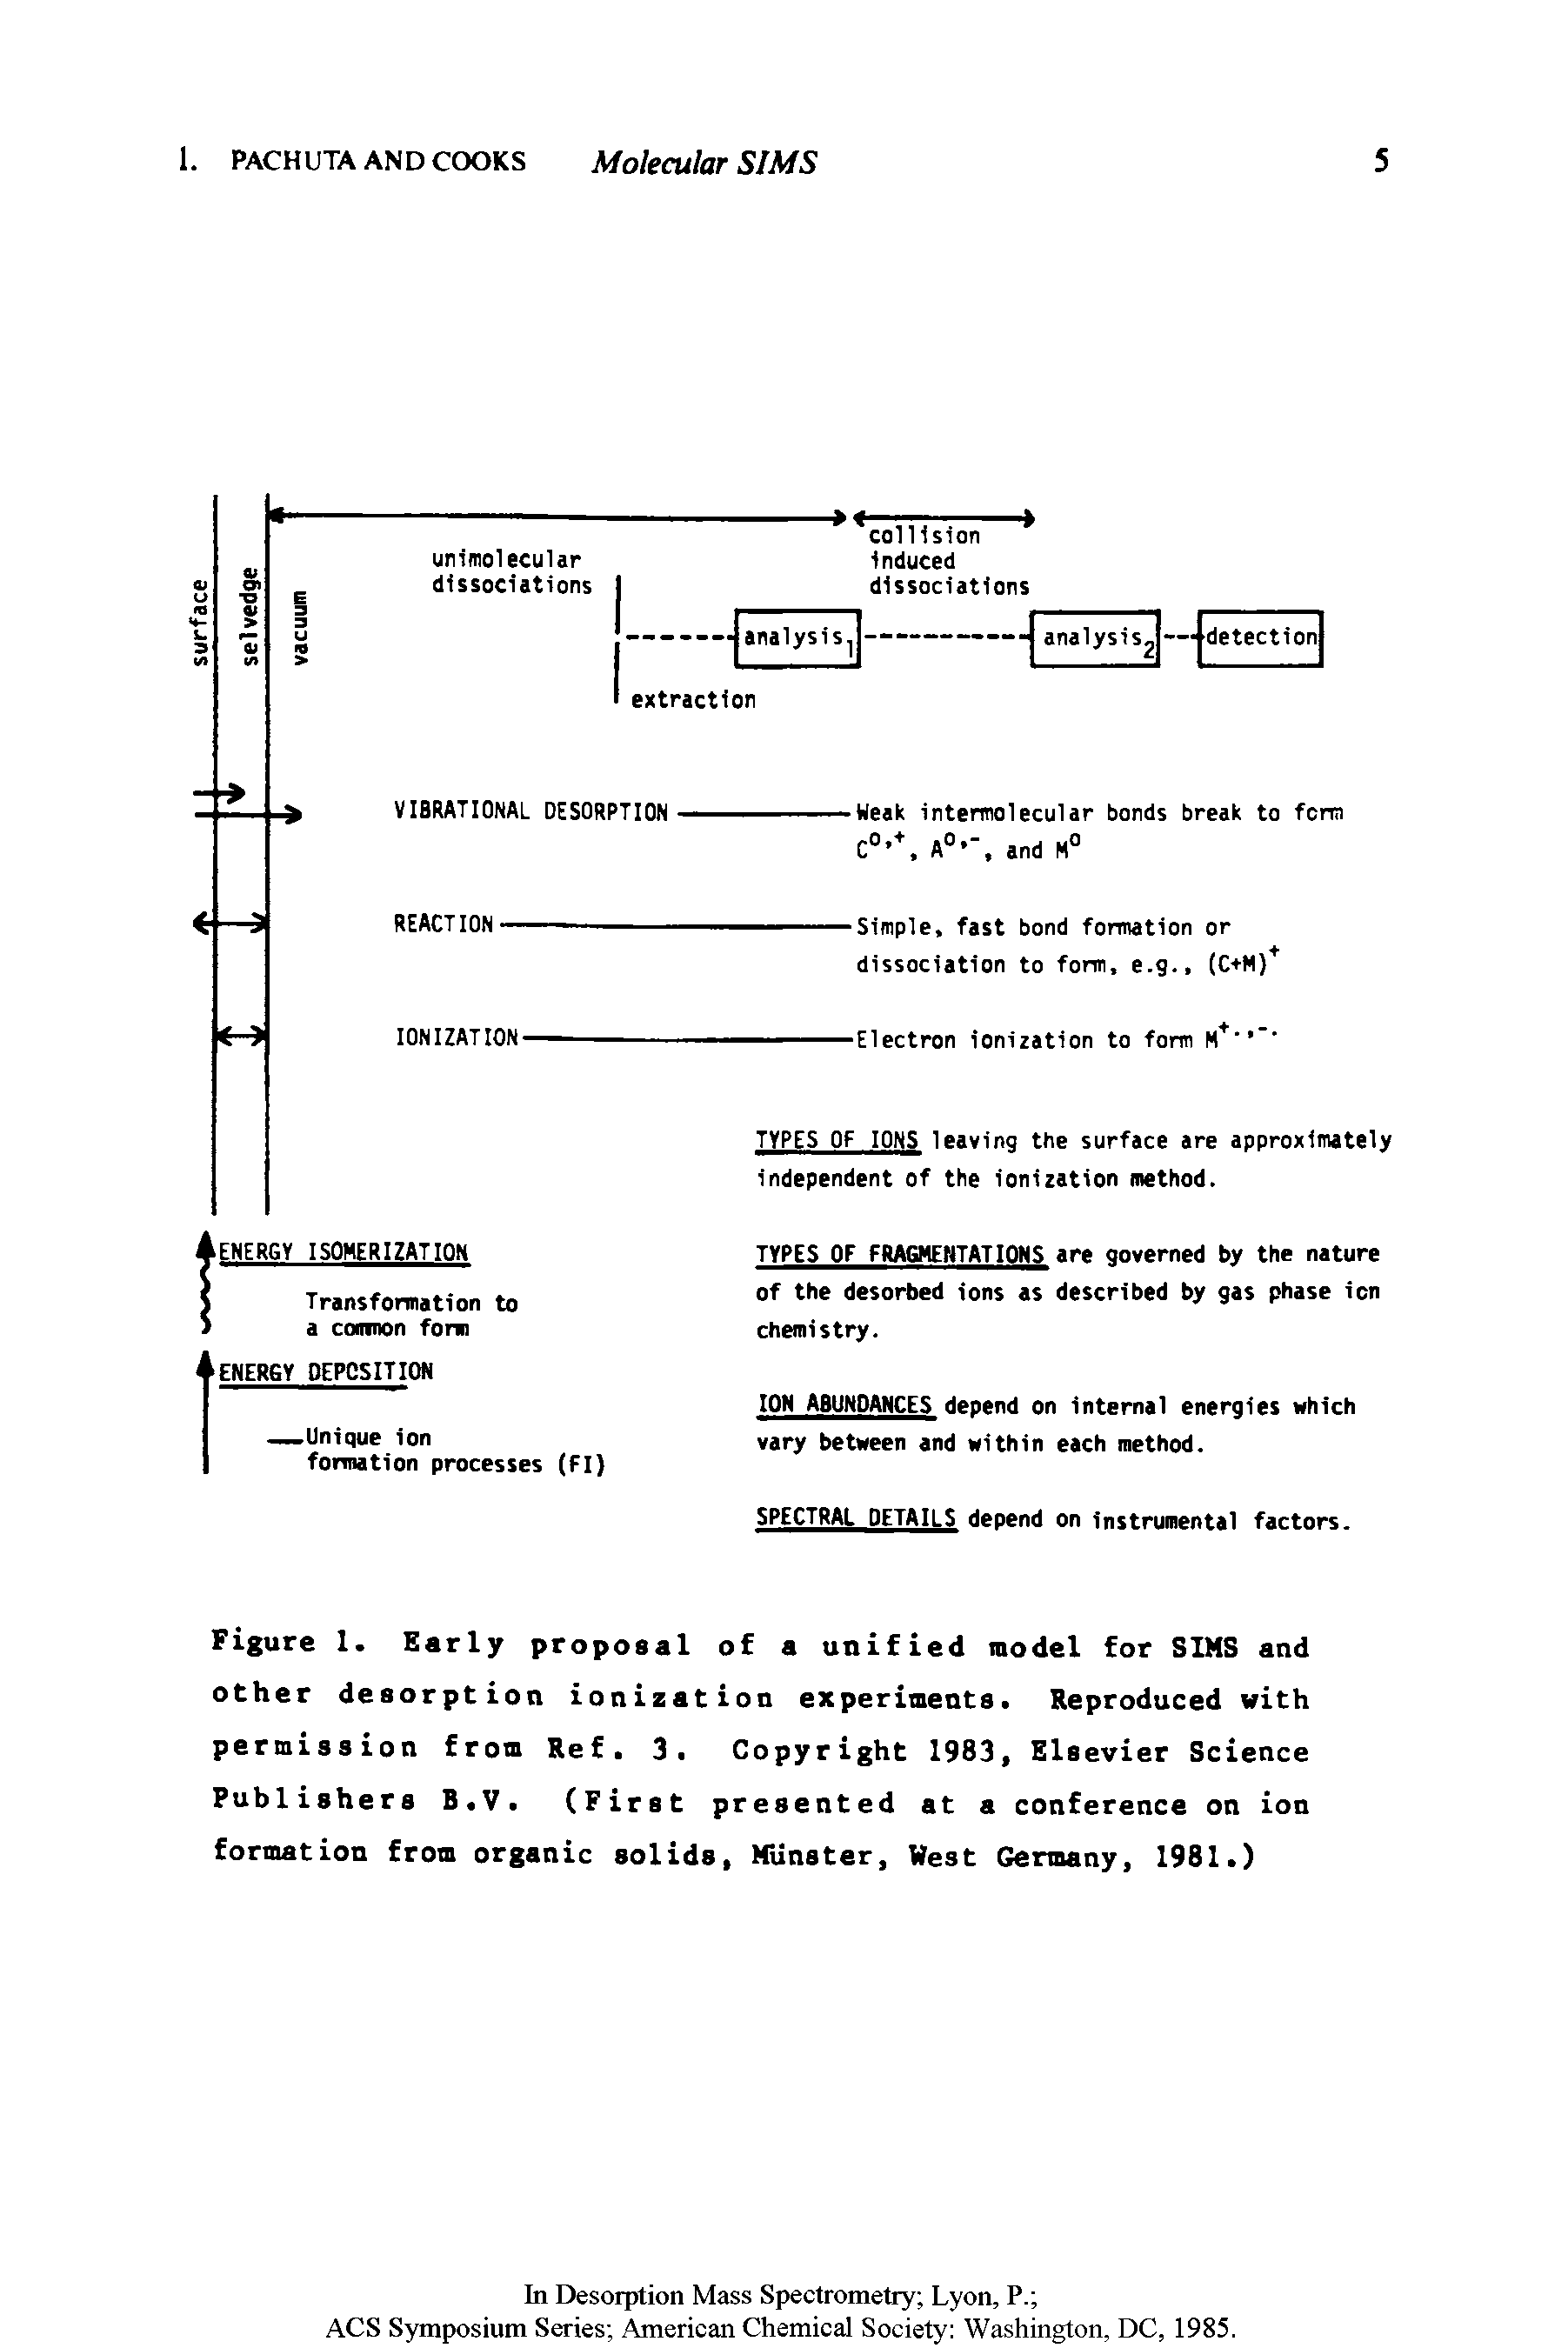 Figure 1. Early proposal of a unified model for SIMS and other desorption ionization experiments. Reproduced with permission from Ref. 3. Copyright 1983, Elsevier Science Publishers B.V. (First presented at a conference on ion formation from organic solids, Munster, West Germany, 1981.)...